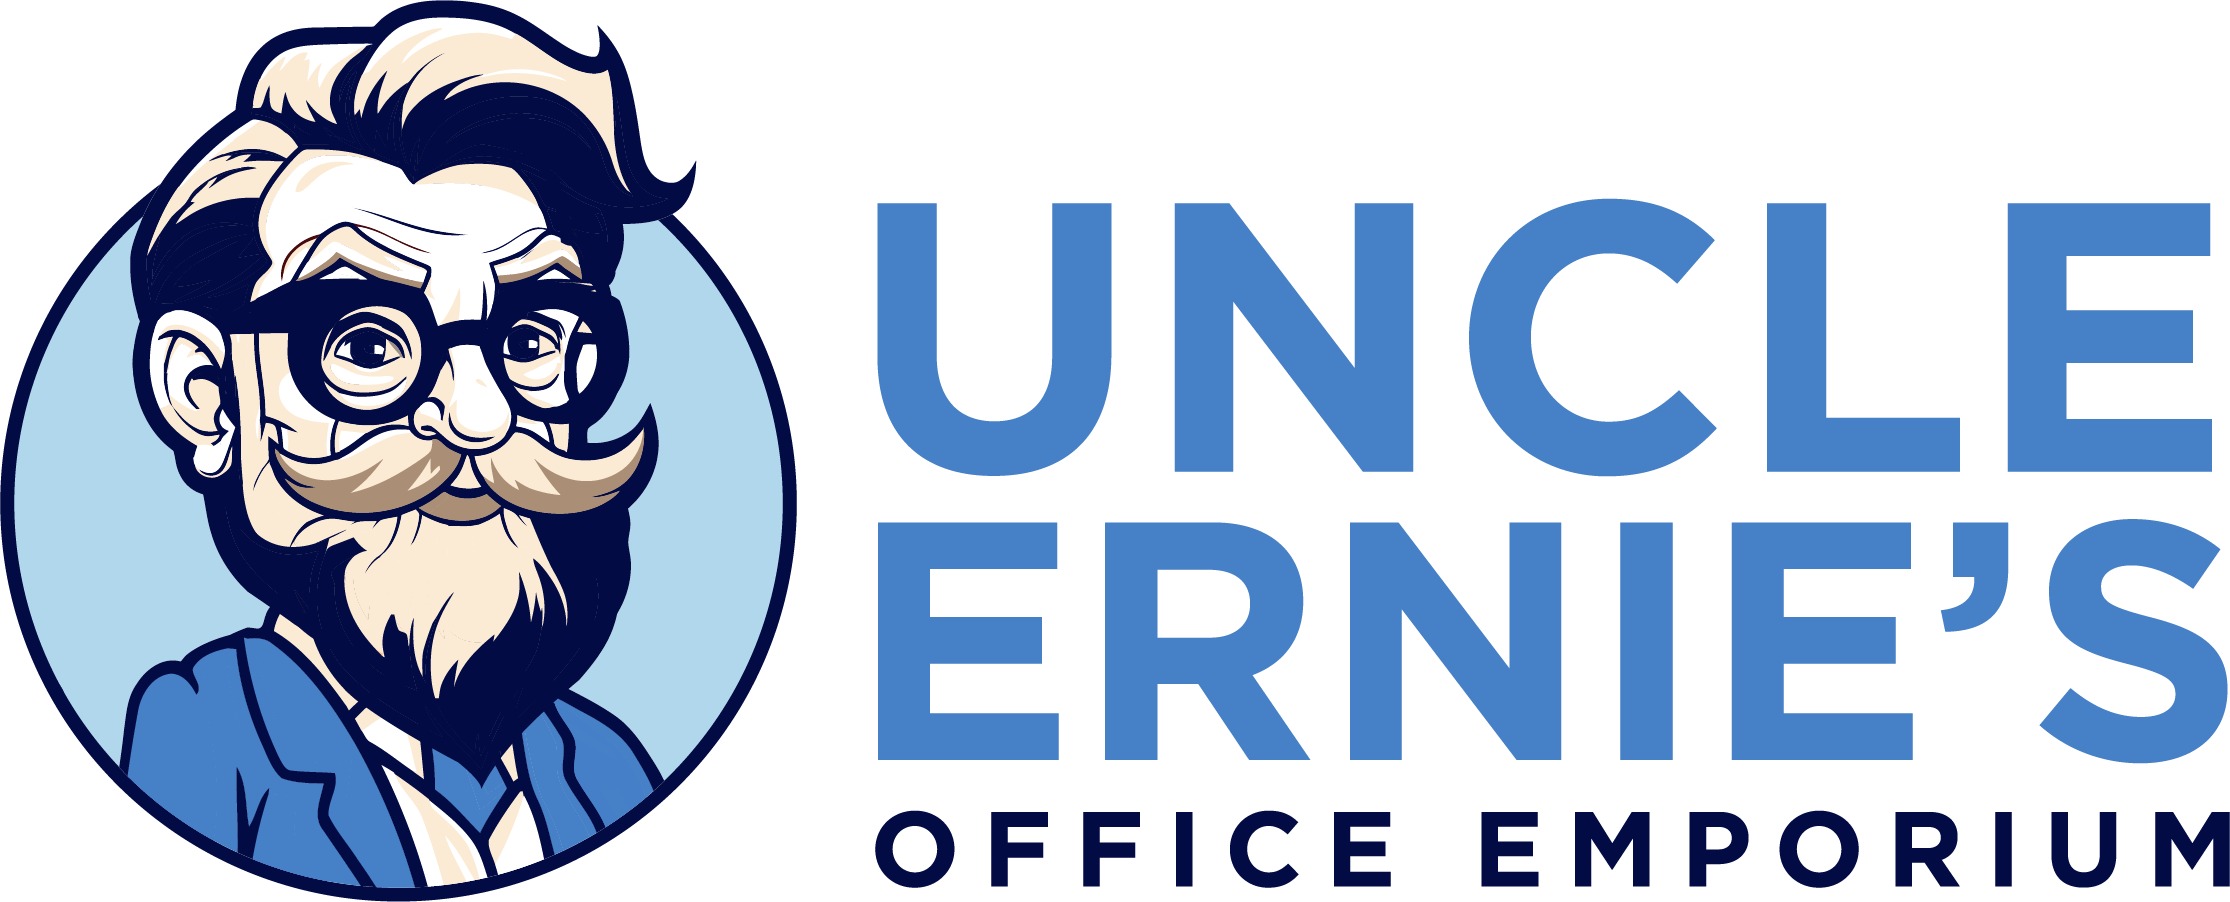 Uncle Ernie’s Office Emporium Launches New Website - A One-Stop Shop for Trendy and Efficient Office Supplies